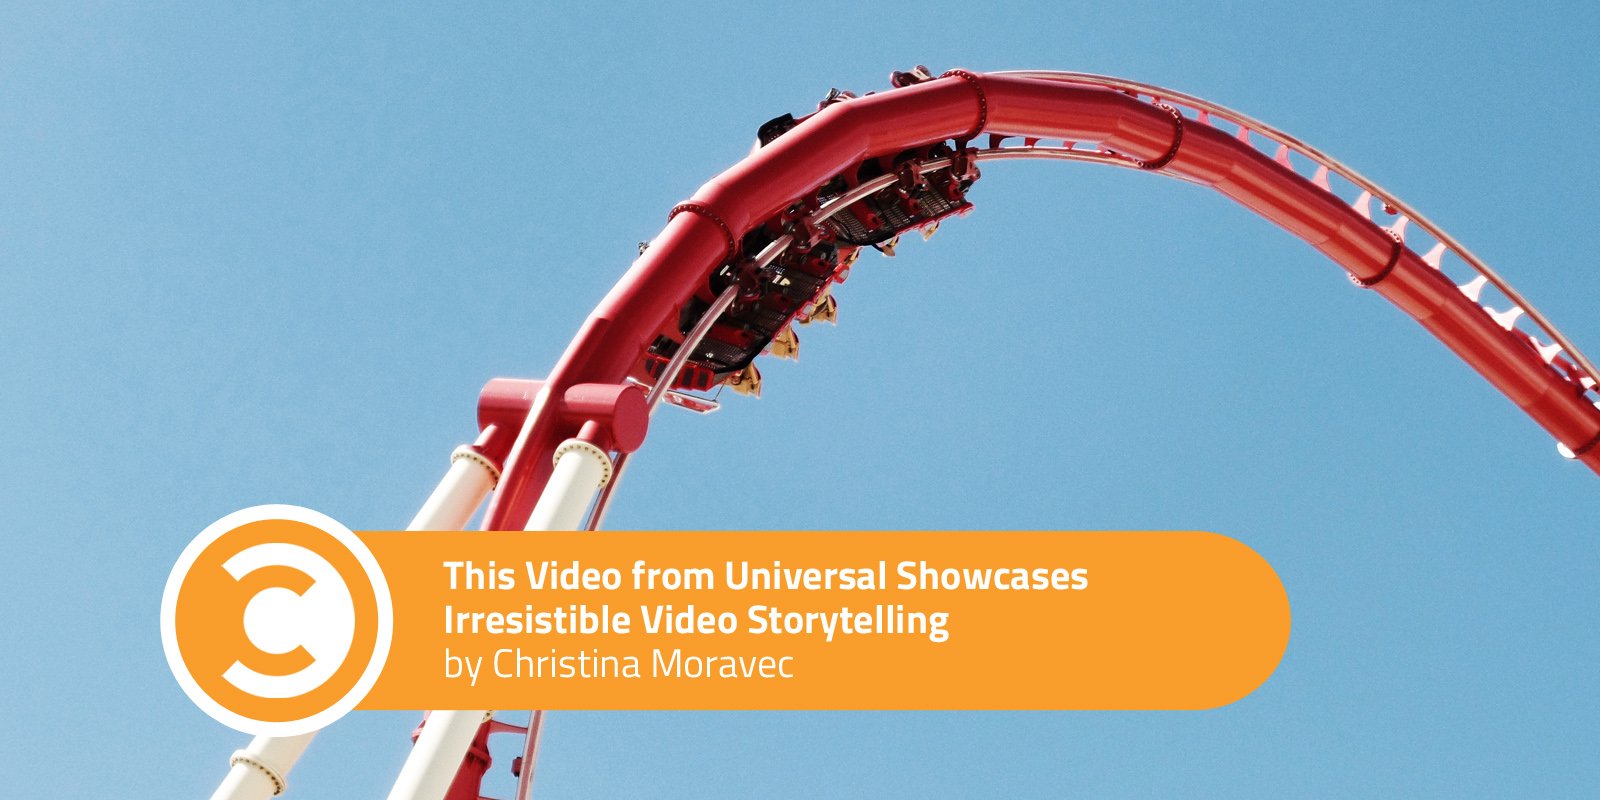 This Video from Universal Showcases Irresistible Video Storytelling